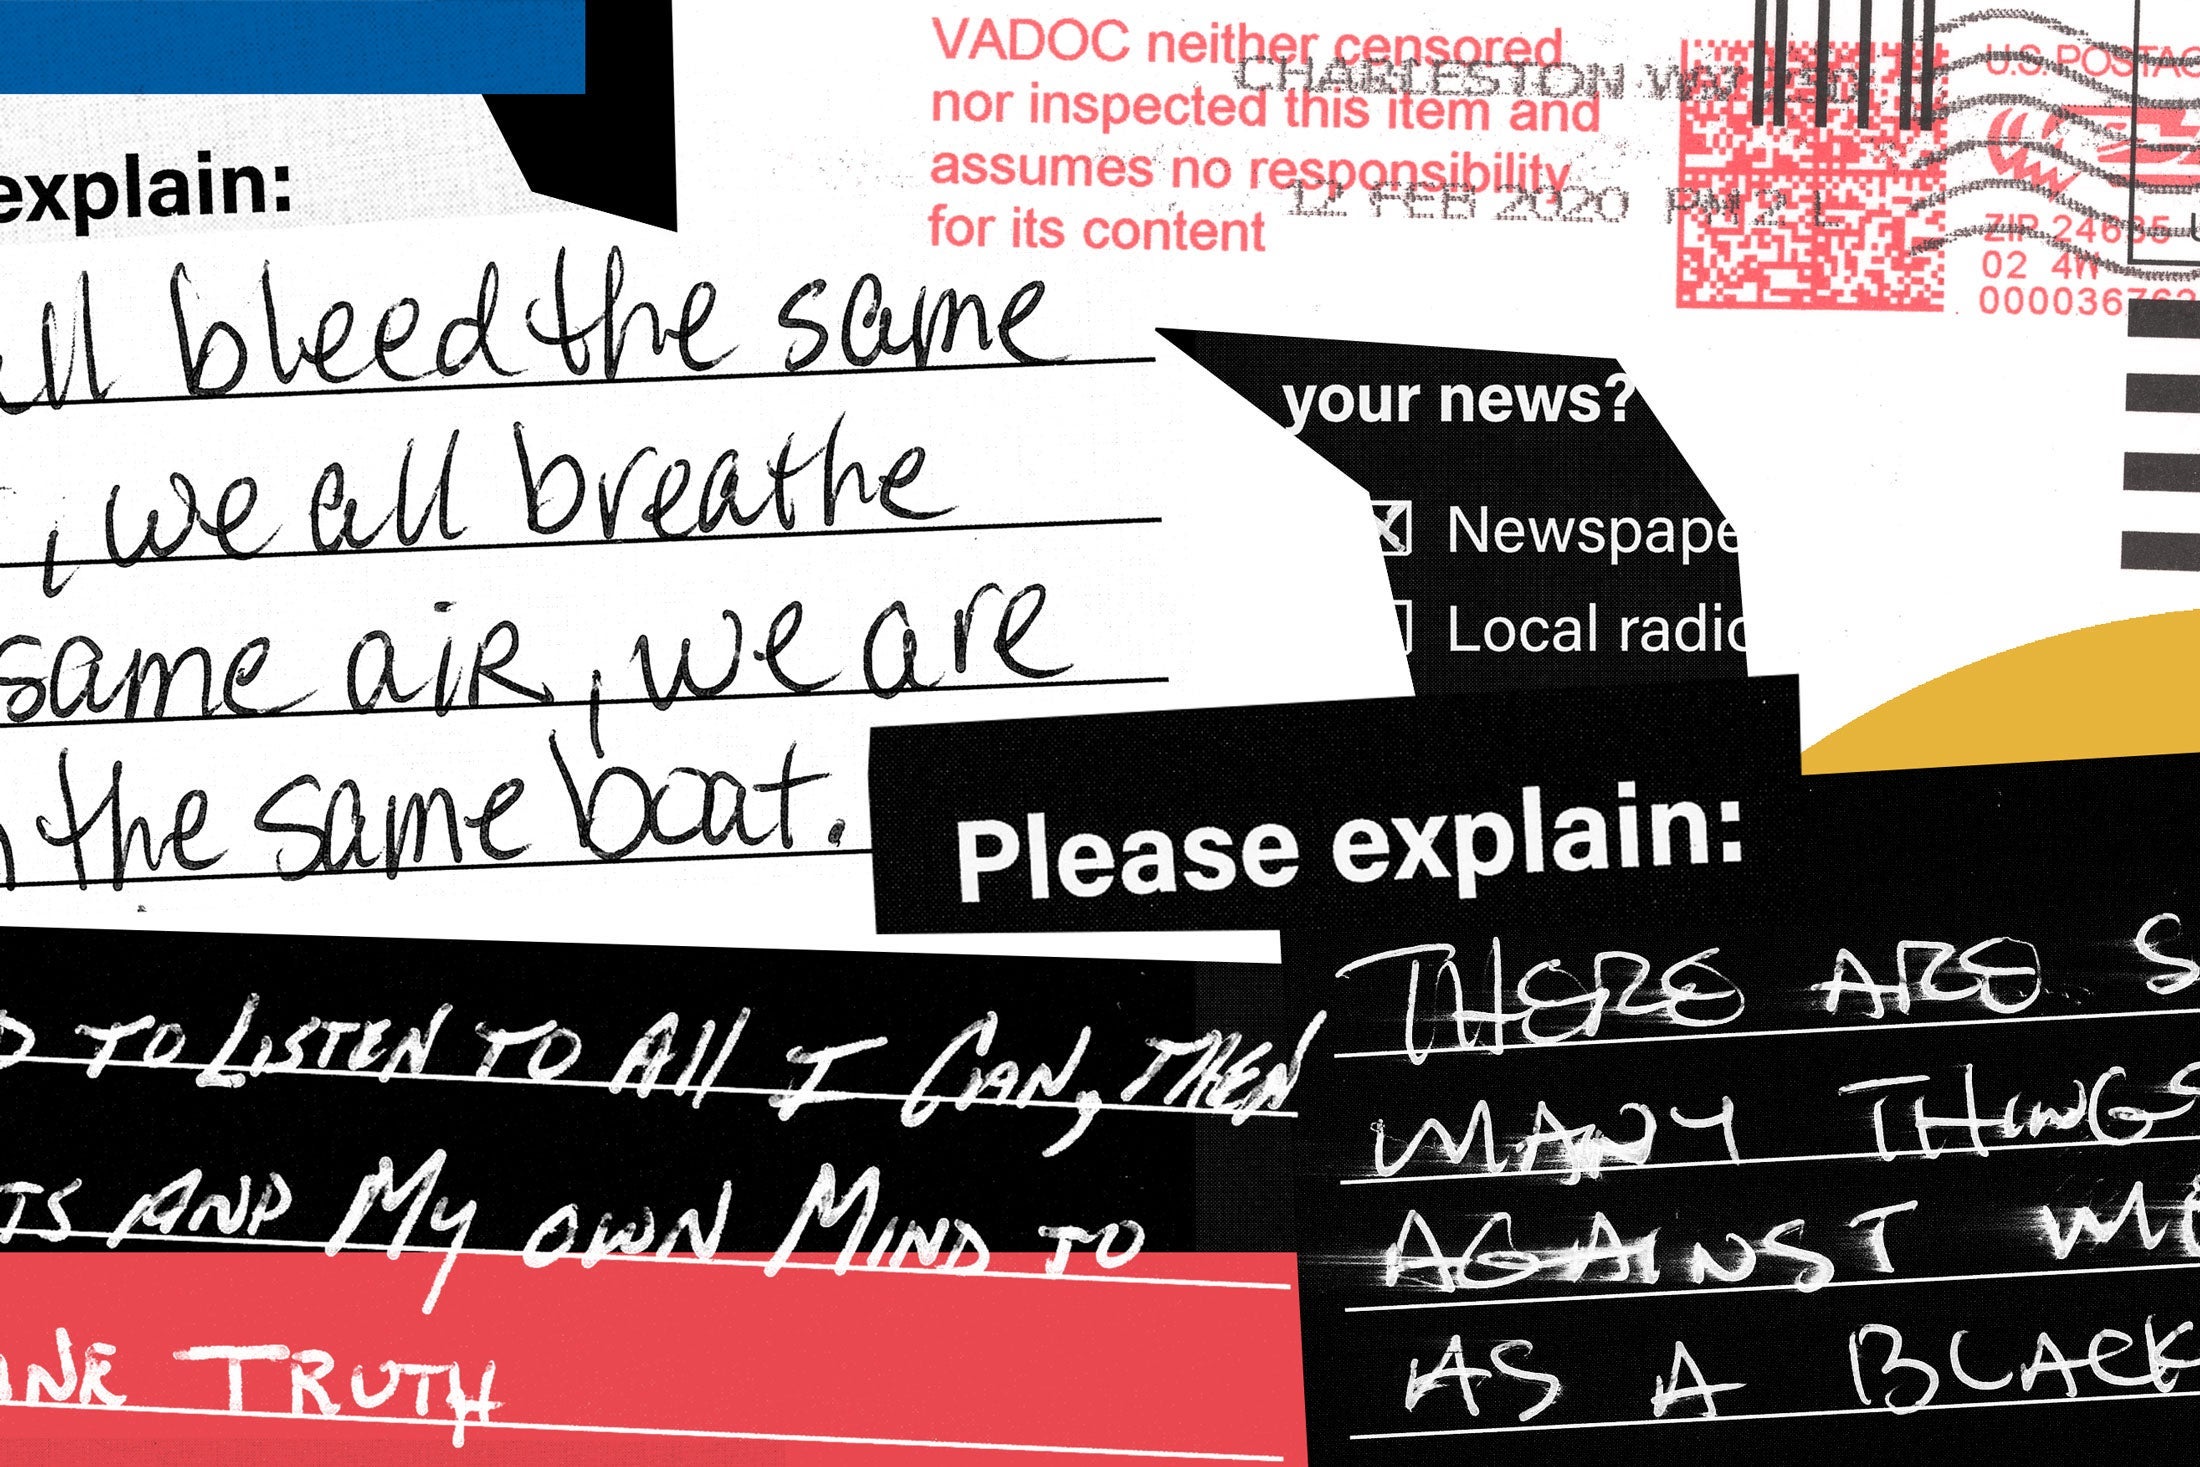 An illustration combining snapshots of handwritten responses from the survey.